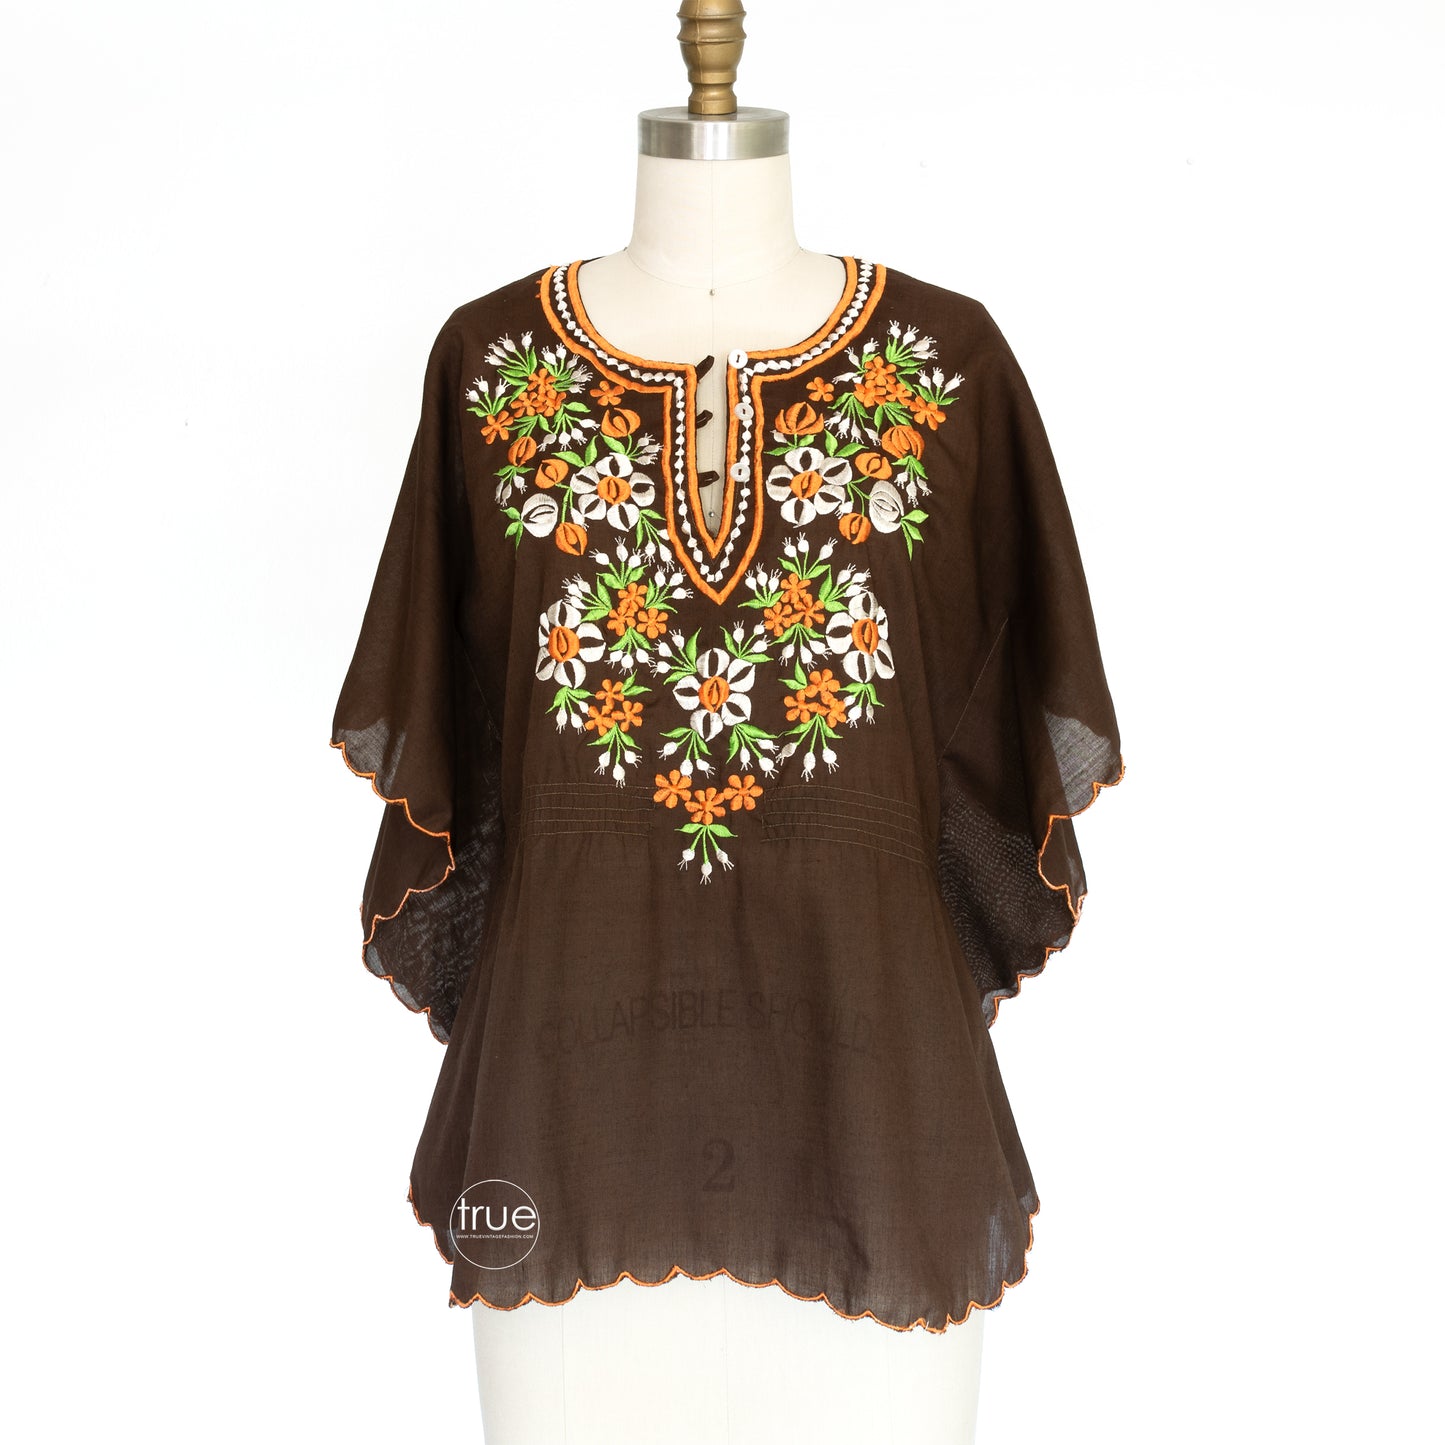 vintage 1970's top ...chocolate floral embroidered poncho top